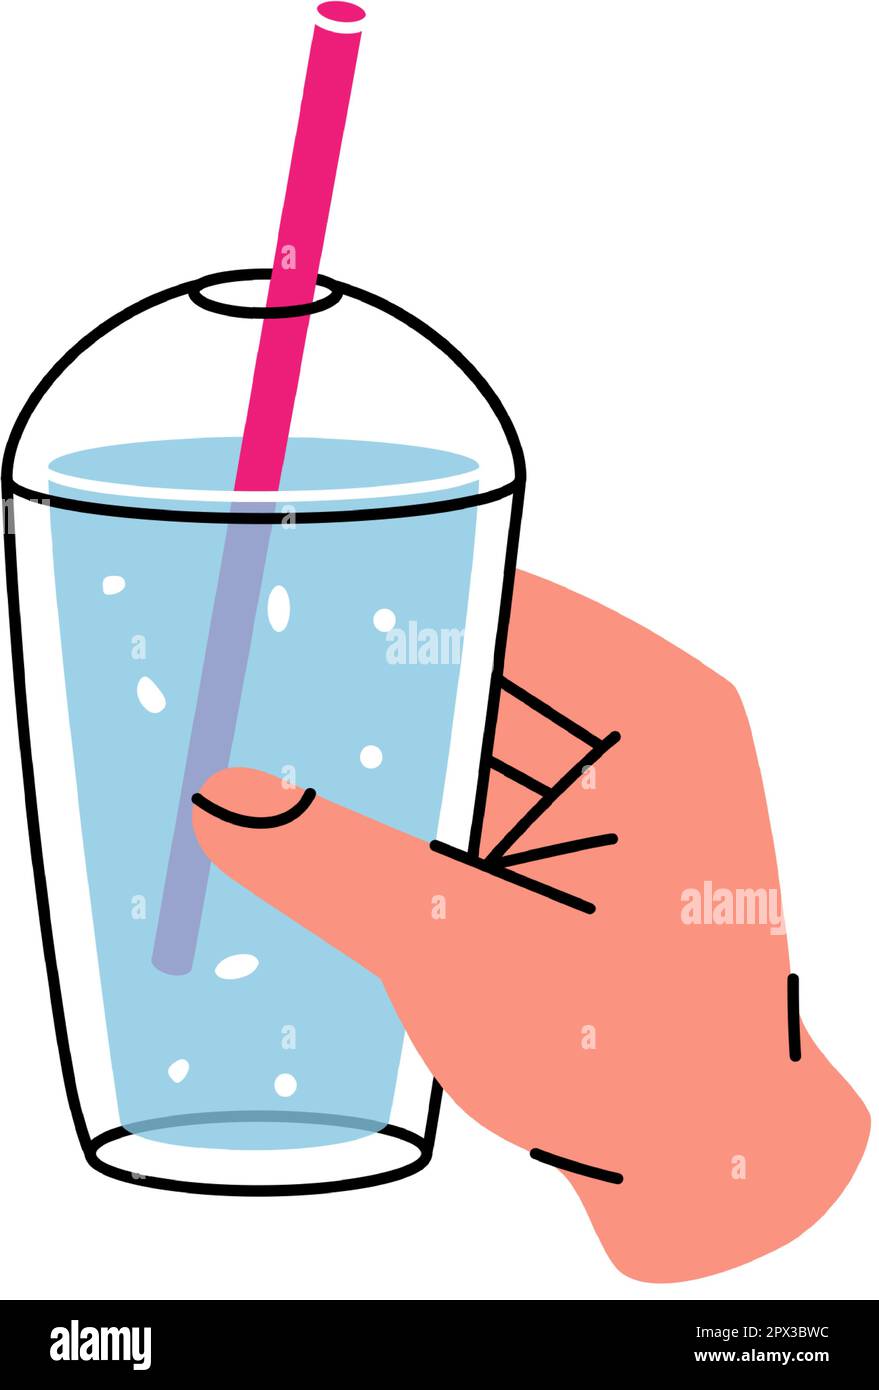 https://c8.alamy.com/comp/2PX3BWC/hand-with-disposable-plastic-cup-icon-empty-glass-or-plastic-bottle-silhouette-vector-illustration-2PX3BWC.jpg